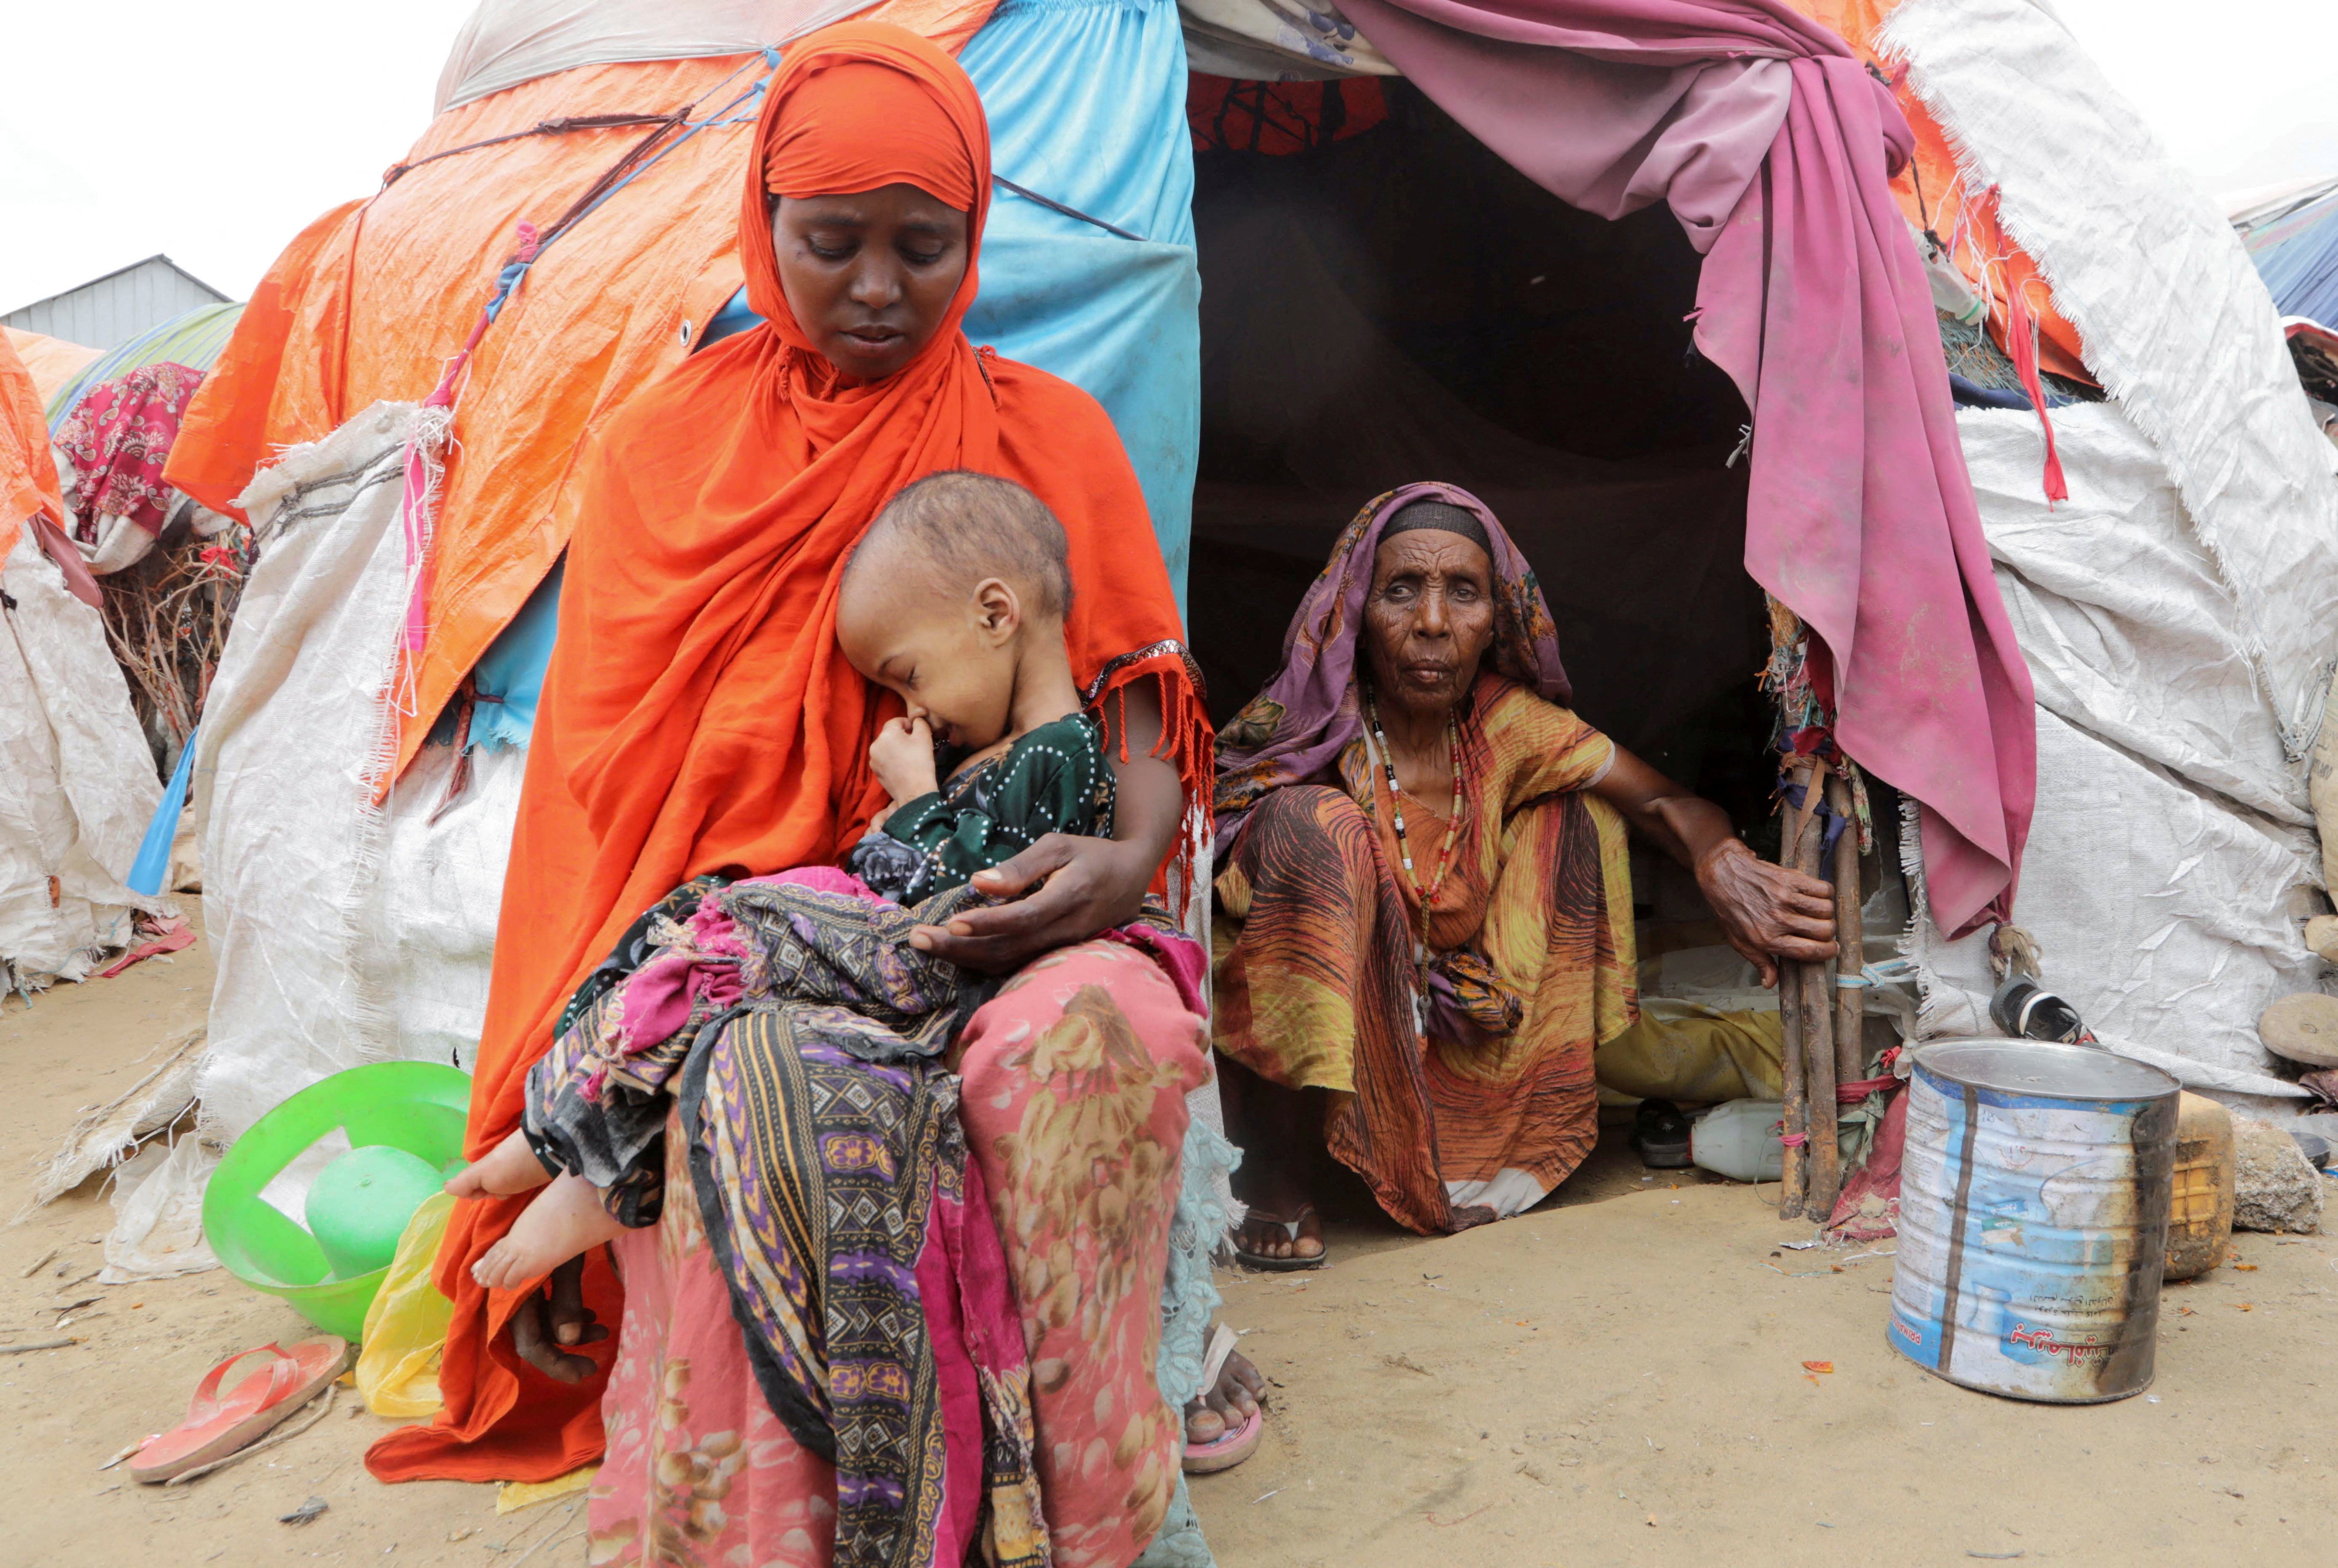 Buney Aayow Ibrahim, a Somali woman affected by the worsening drought due to failed rainy seasons, holds her child Sadia Salas Abdi, 3, as her grandmother Habiba Osman looks on, outside their makeshift shelter at the Alla Futo camp for internally displaced people, in the outskirts of Mogadishu